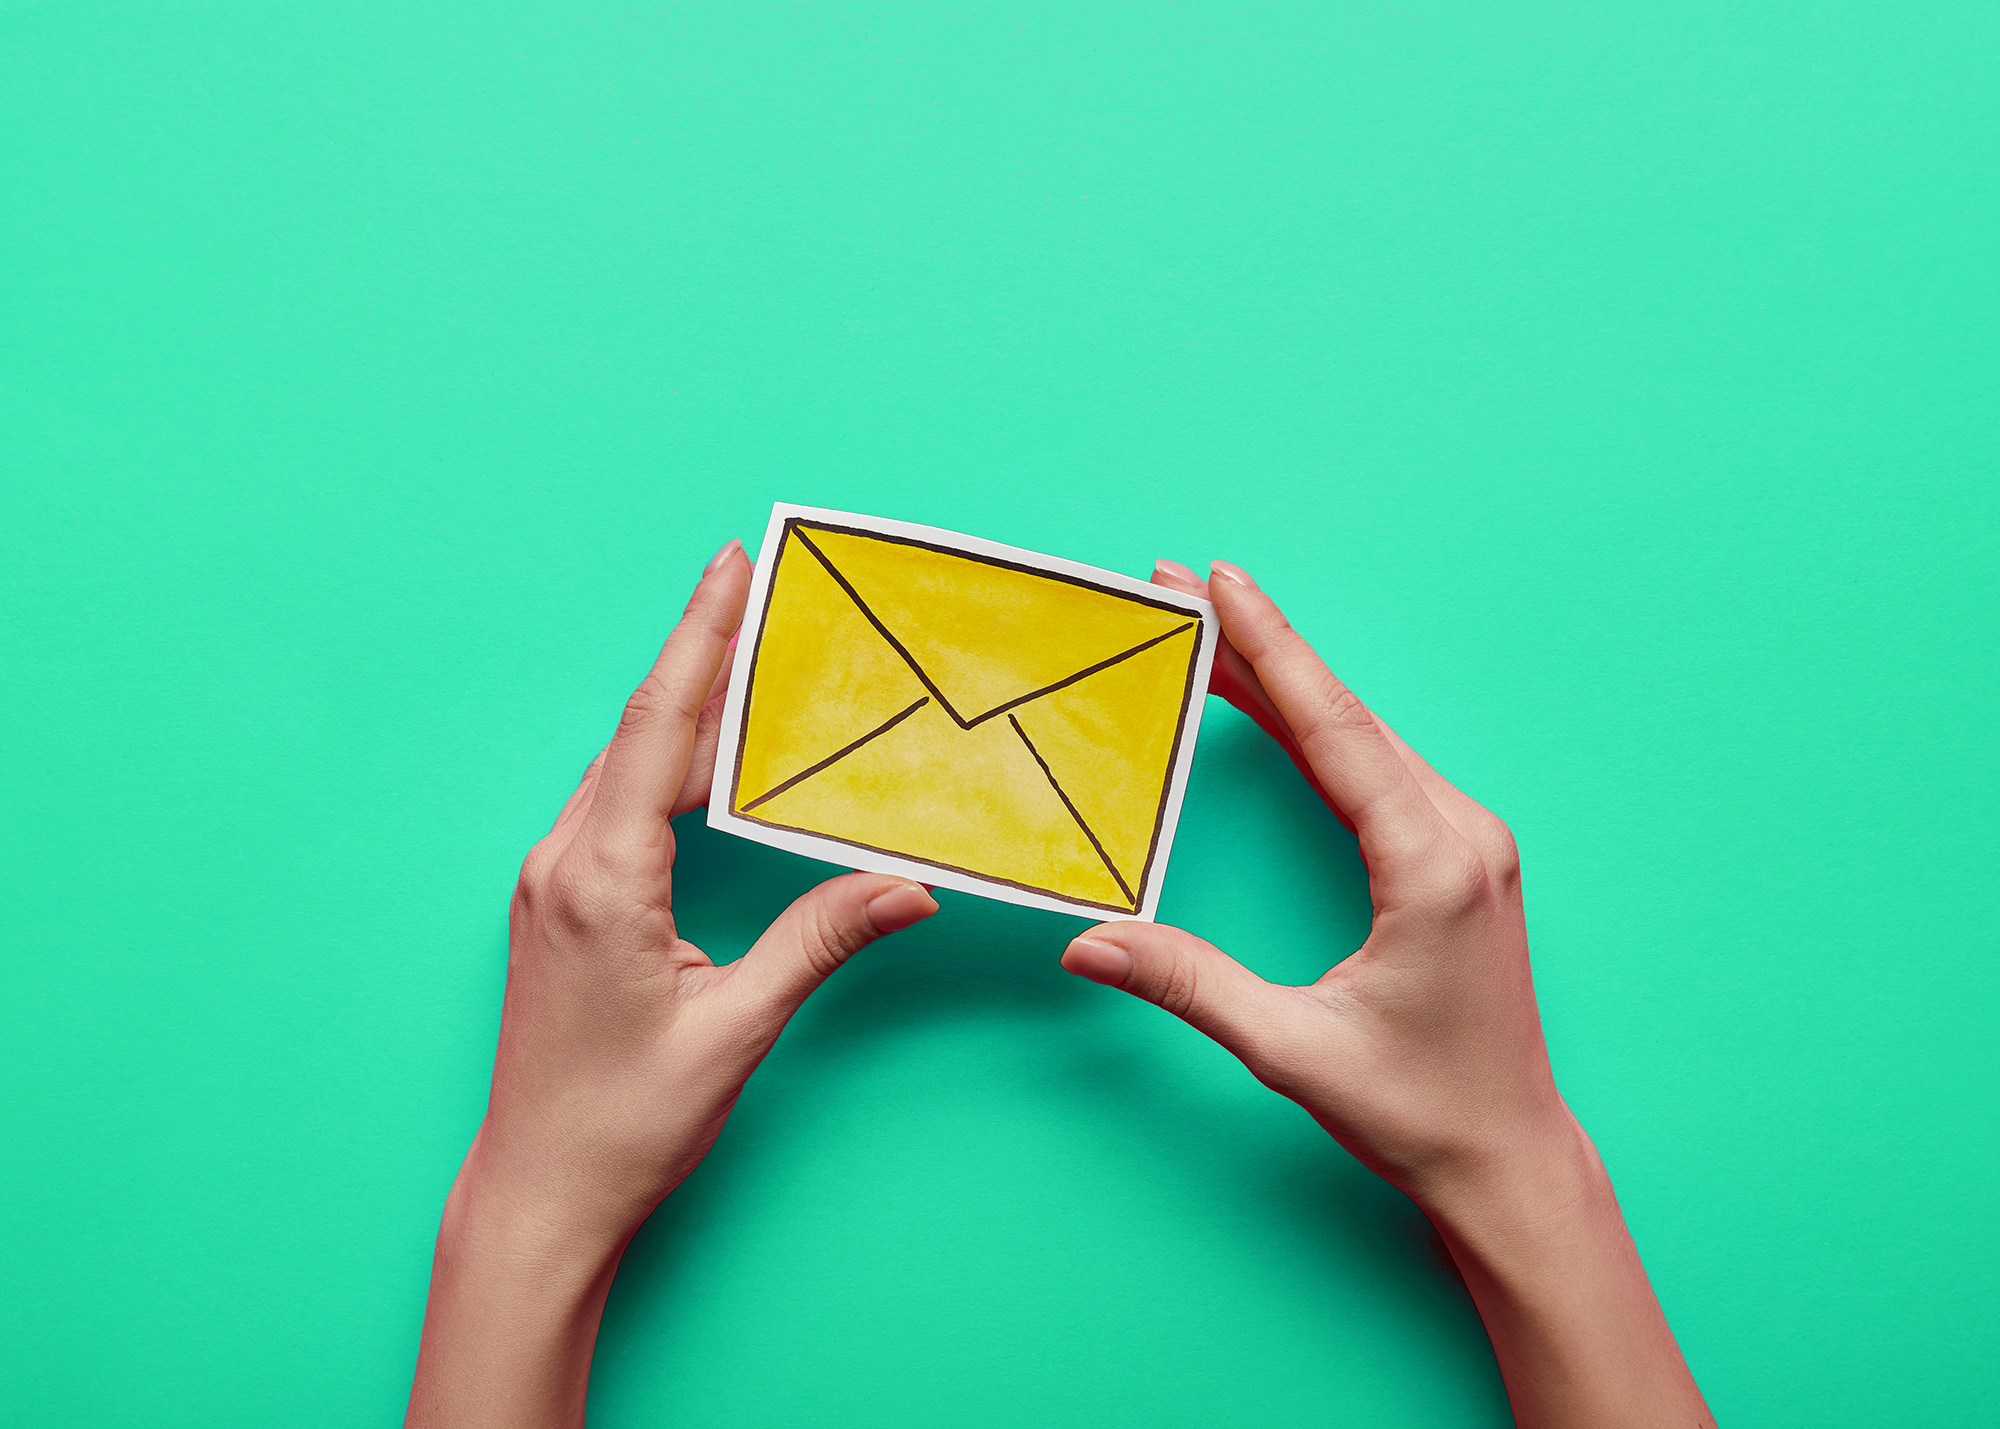 How to Run a Successful Email Marketing Campaign